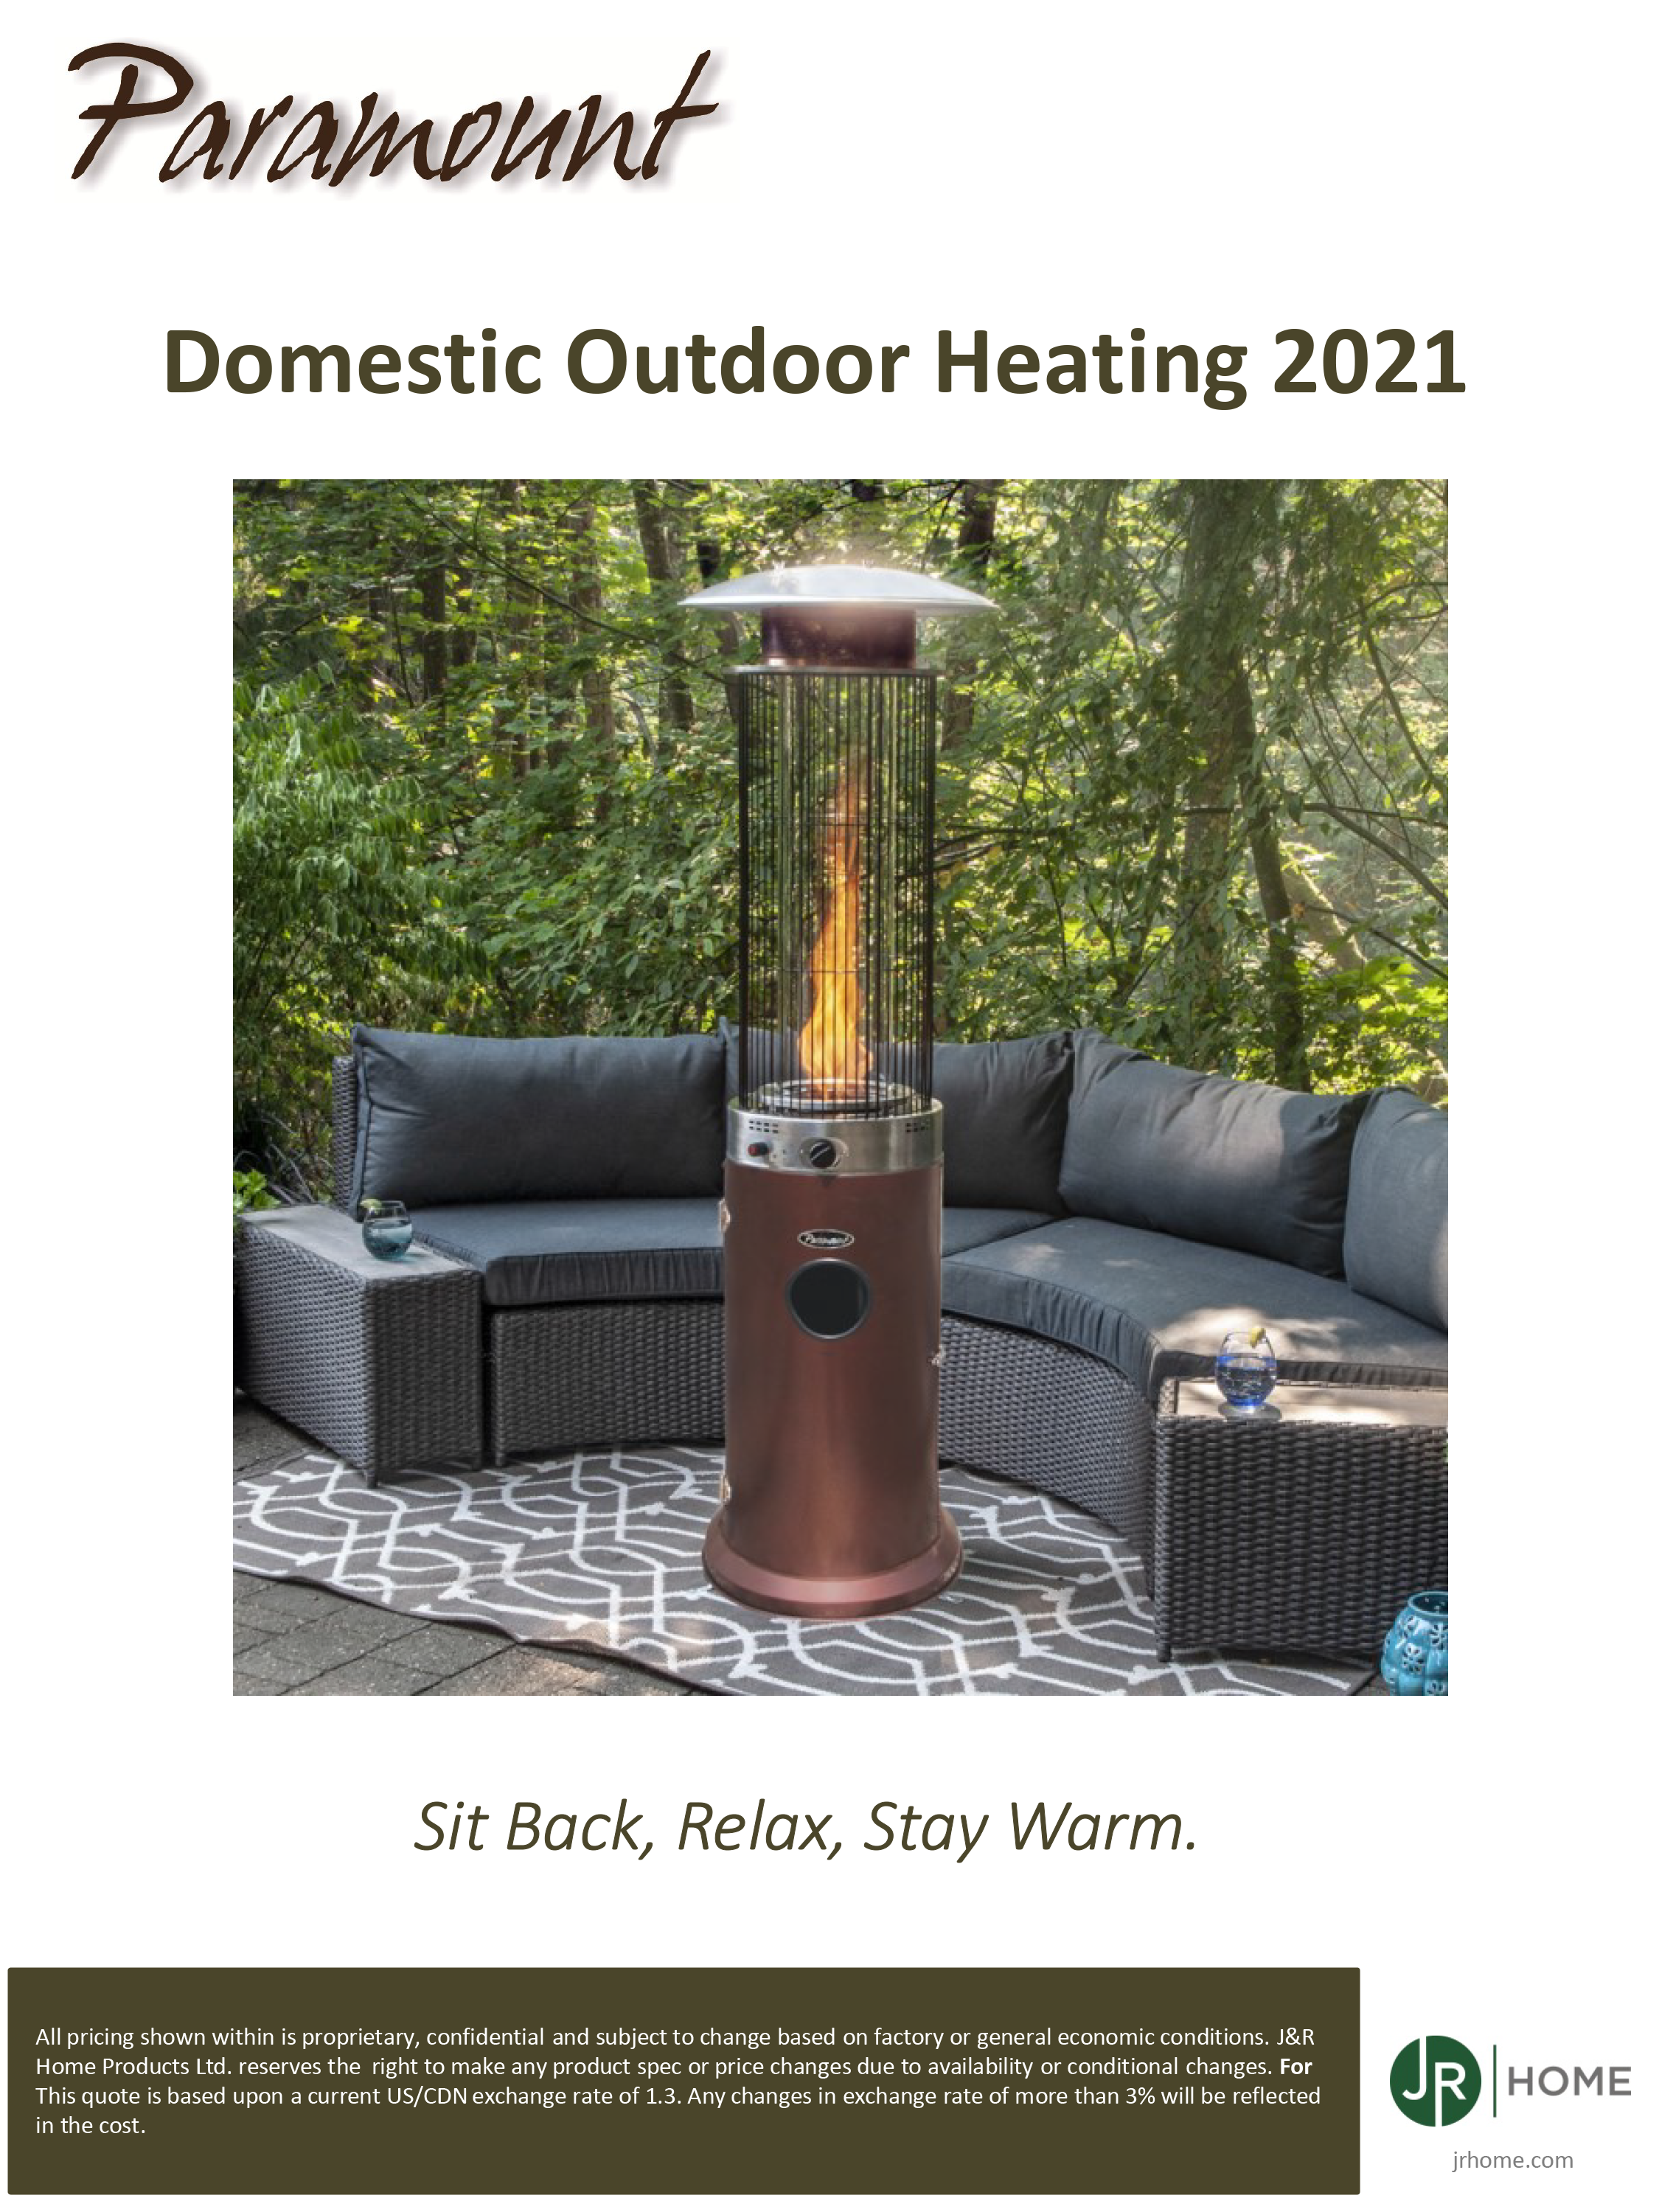 Domestic Outdoor Heating 2021 Paramount Cover